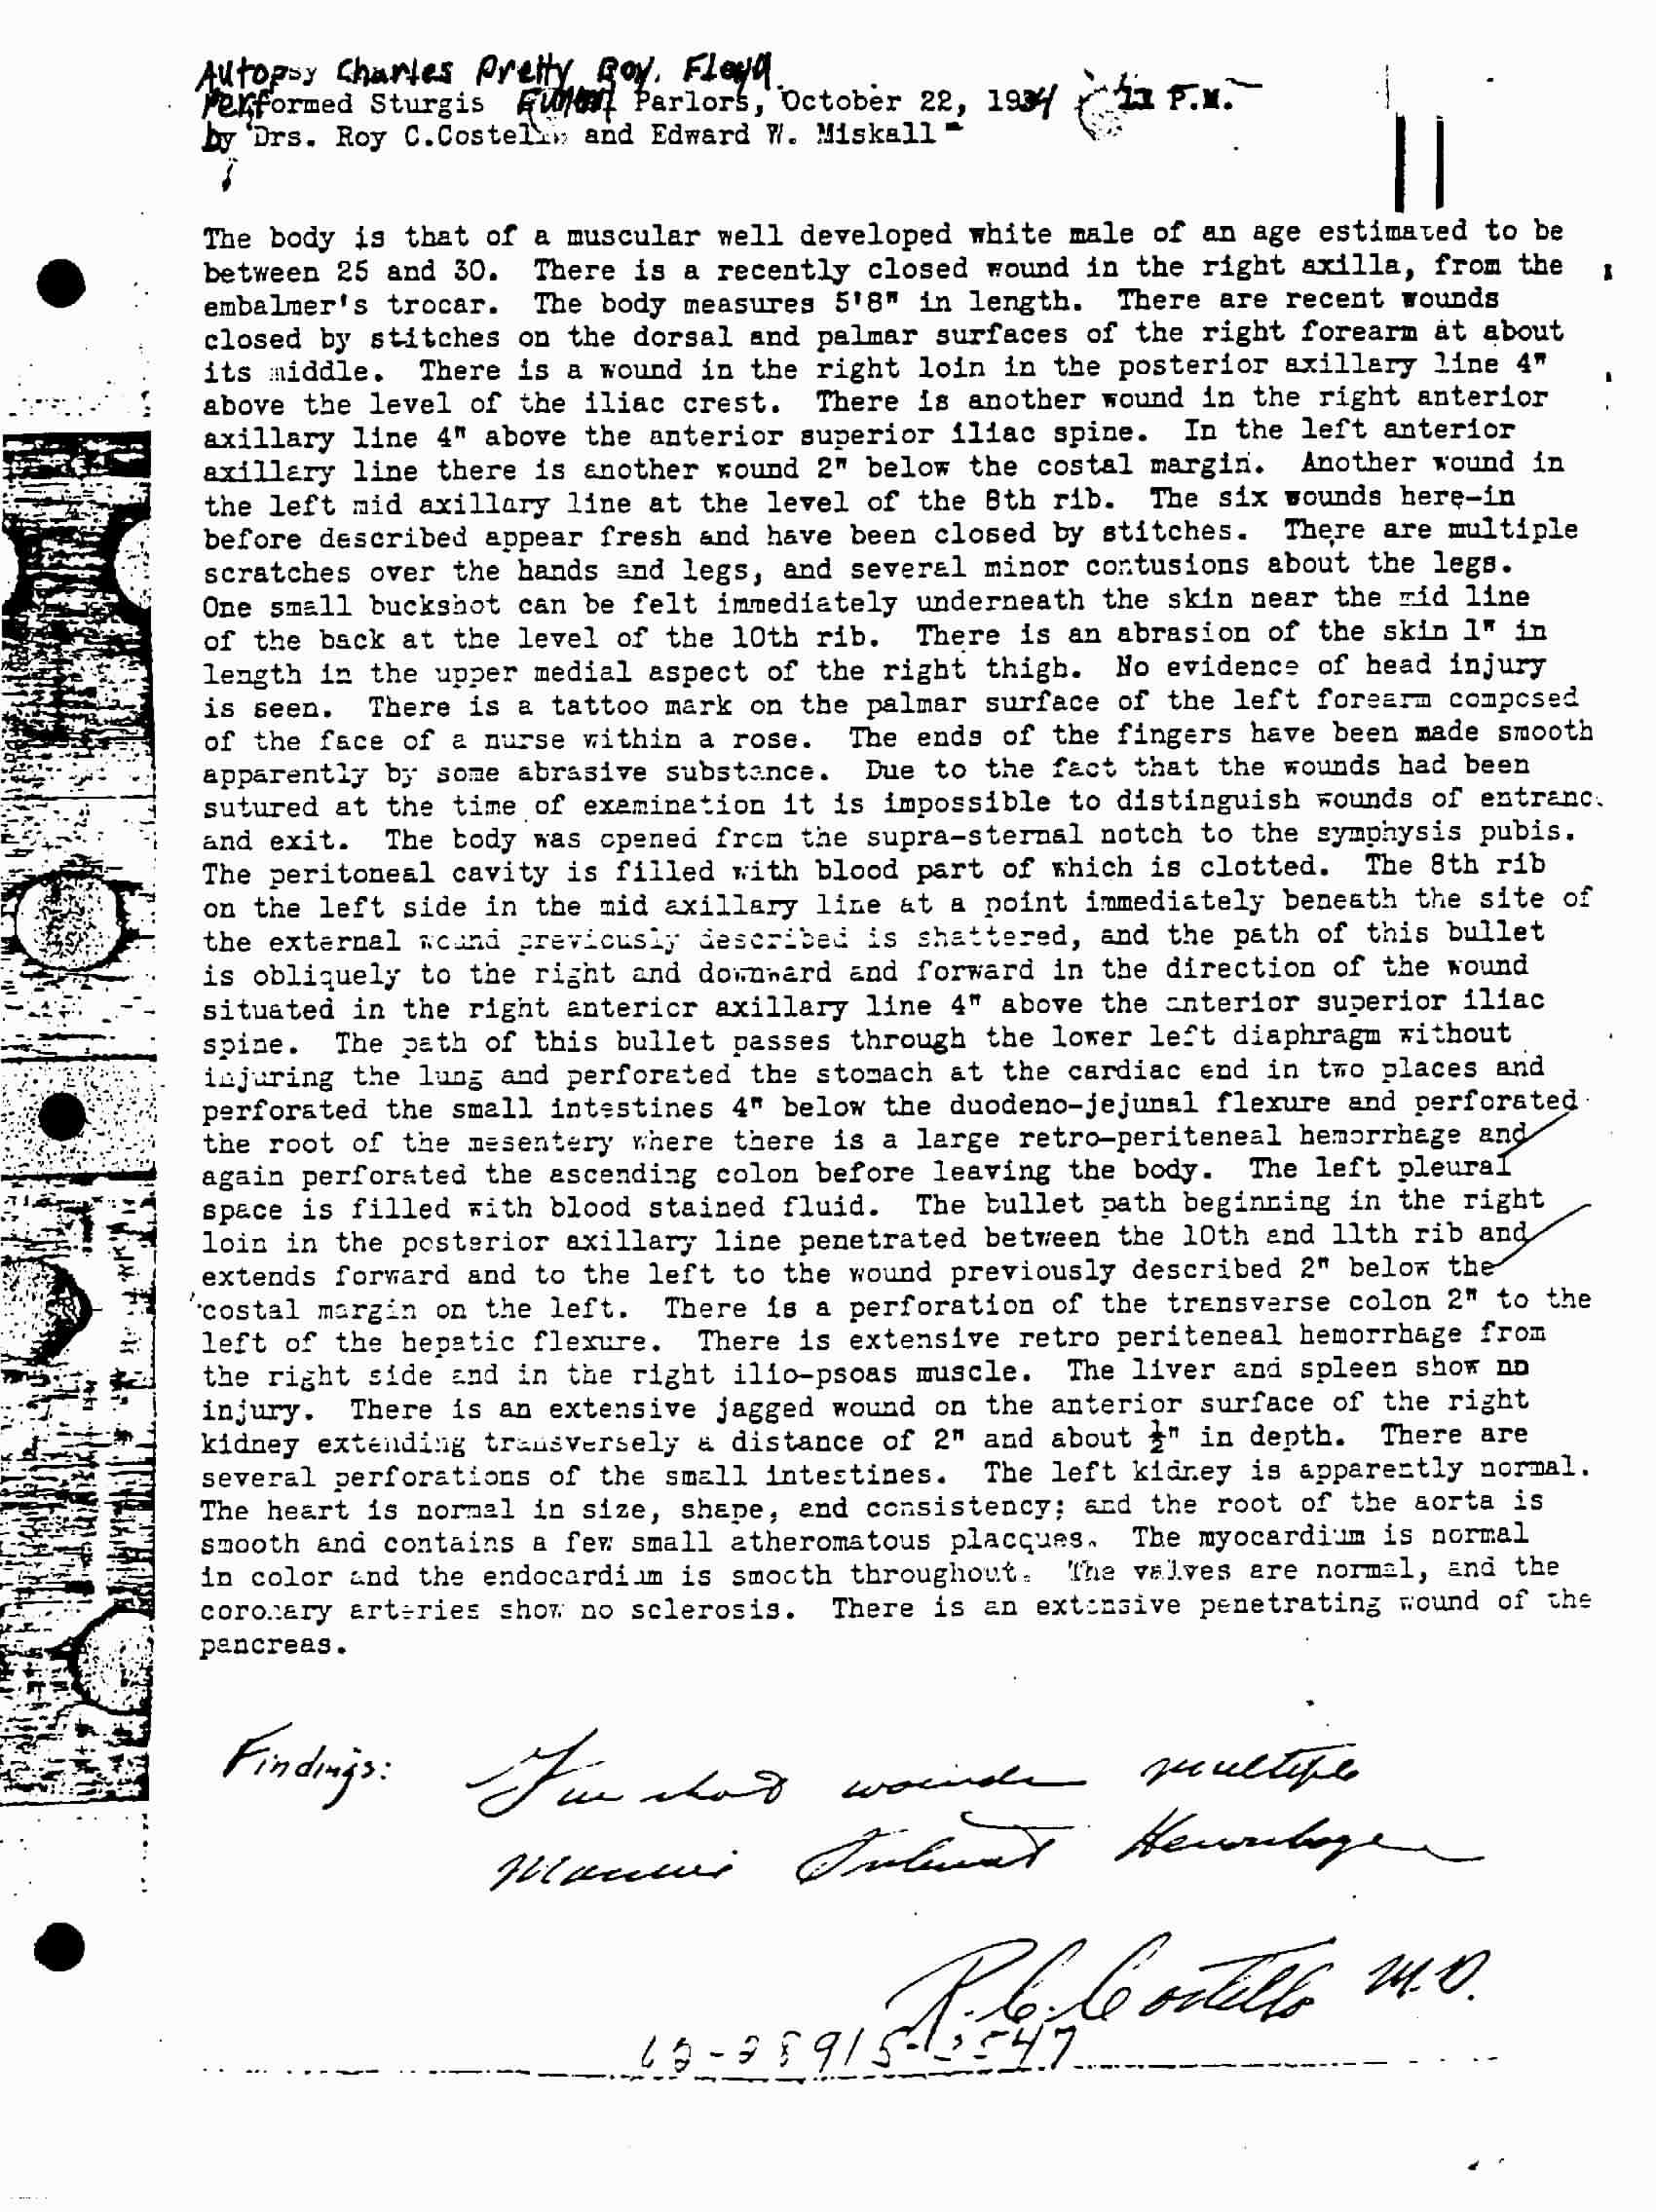 Photo copy of Autopsy of Charles Floyd